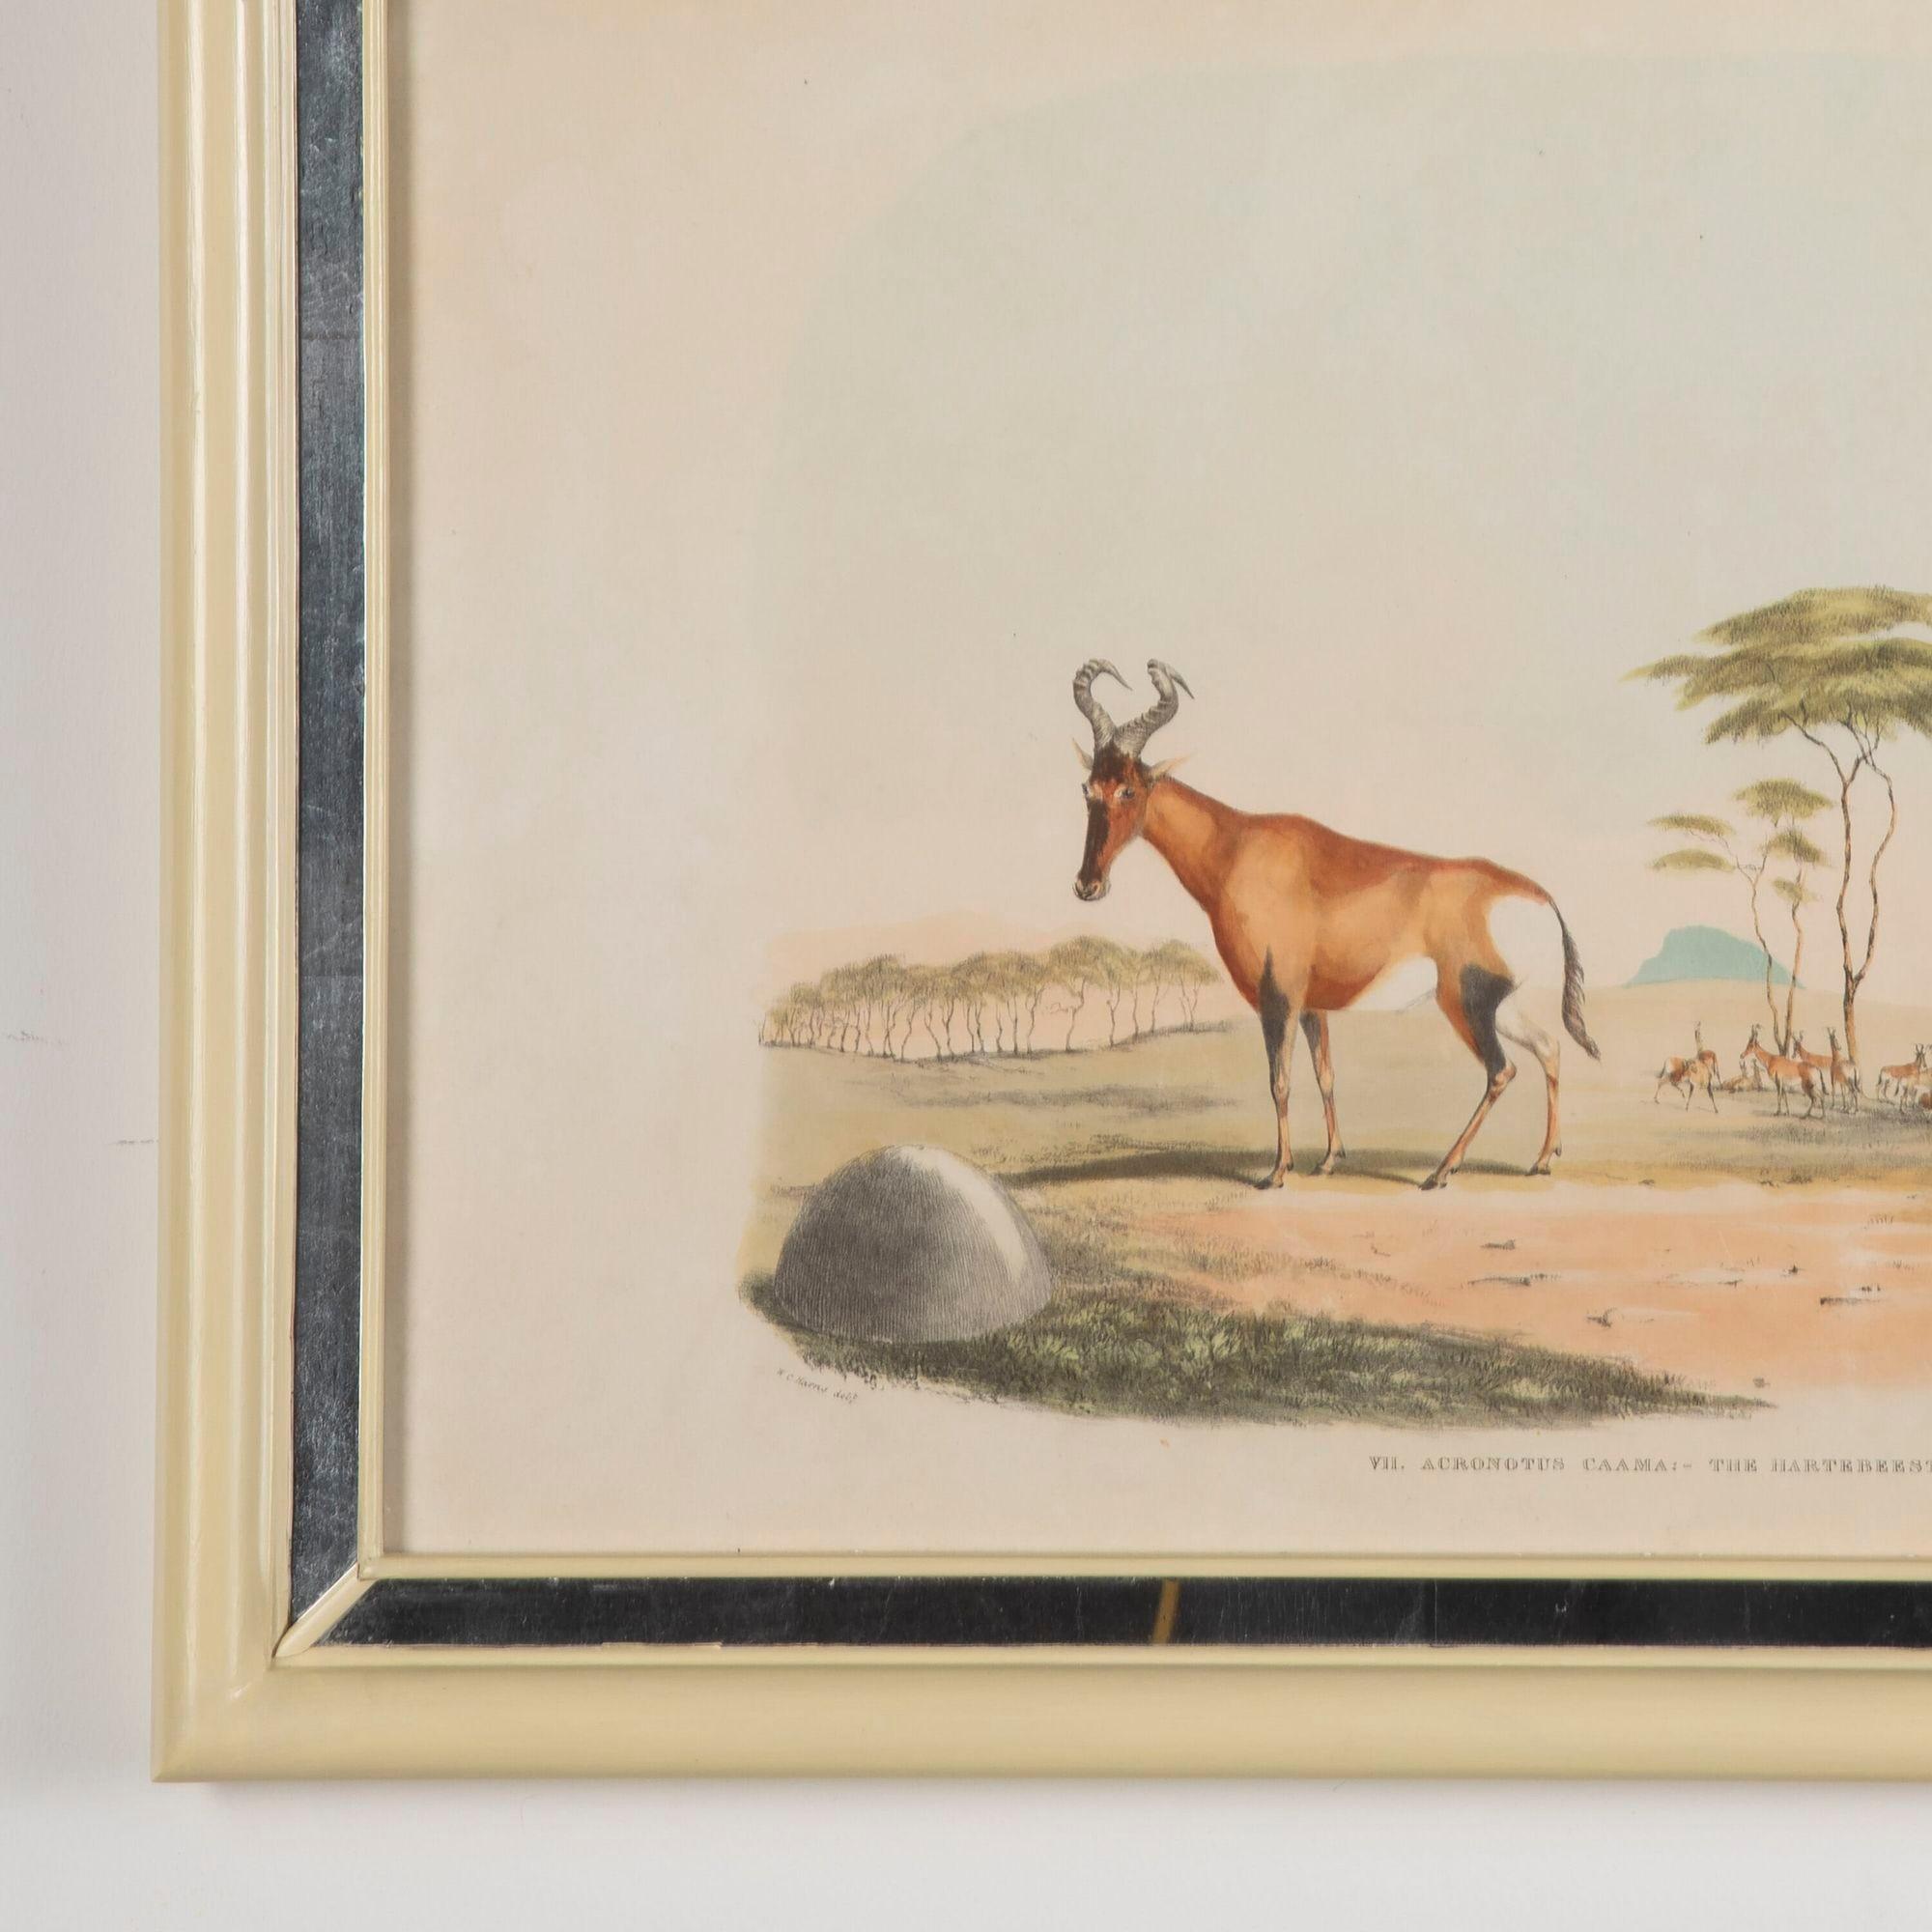 English 19th Century African Wildlife Lithographs